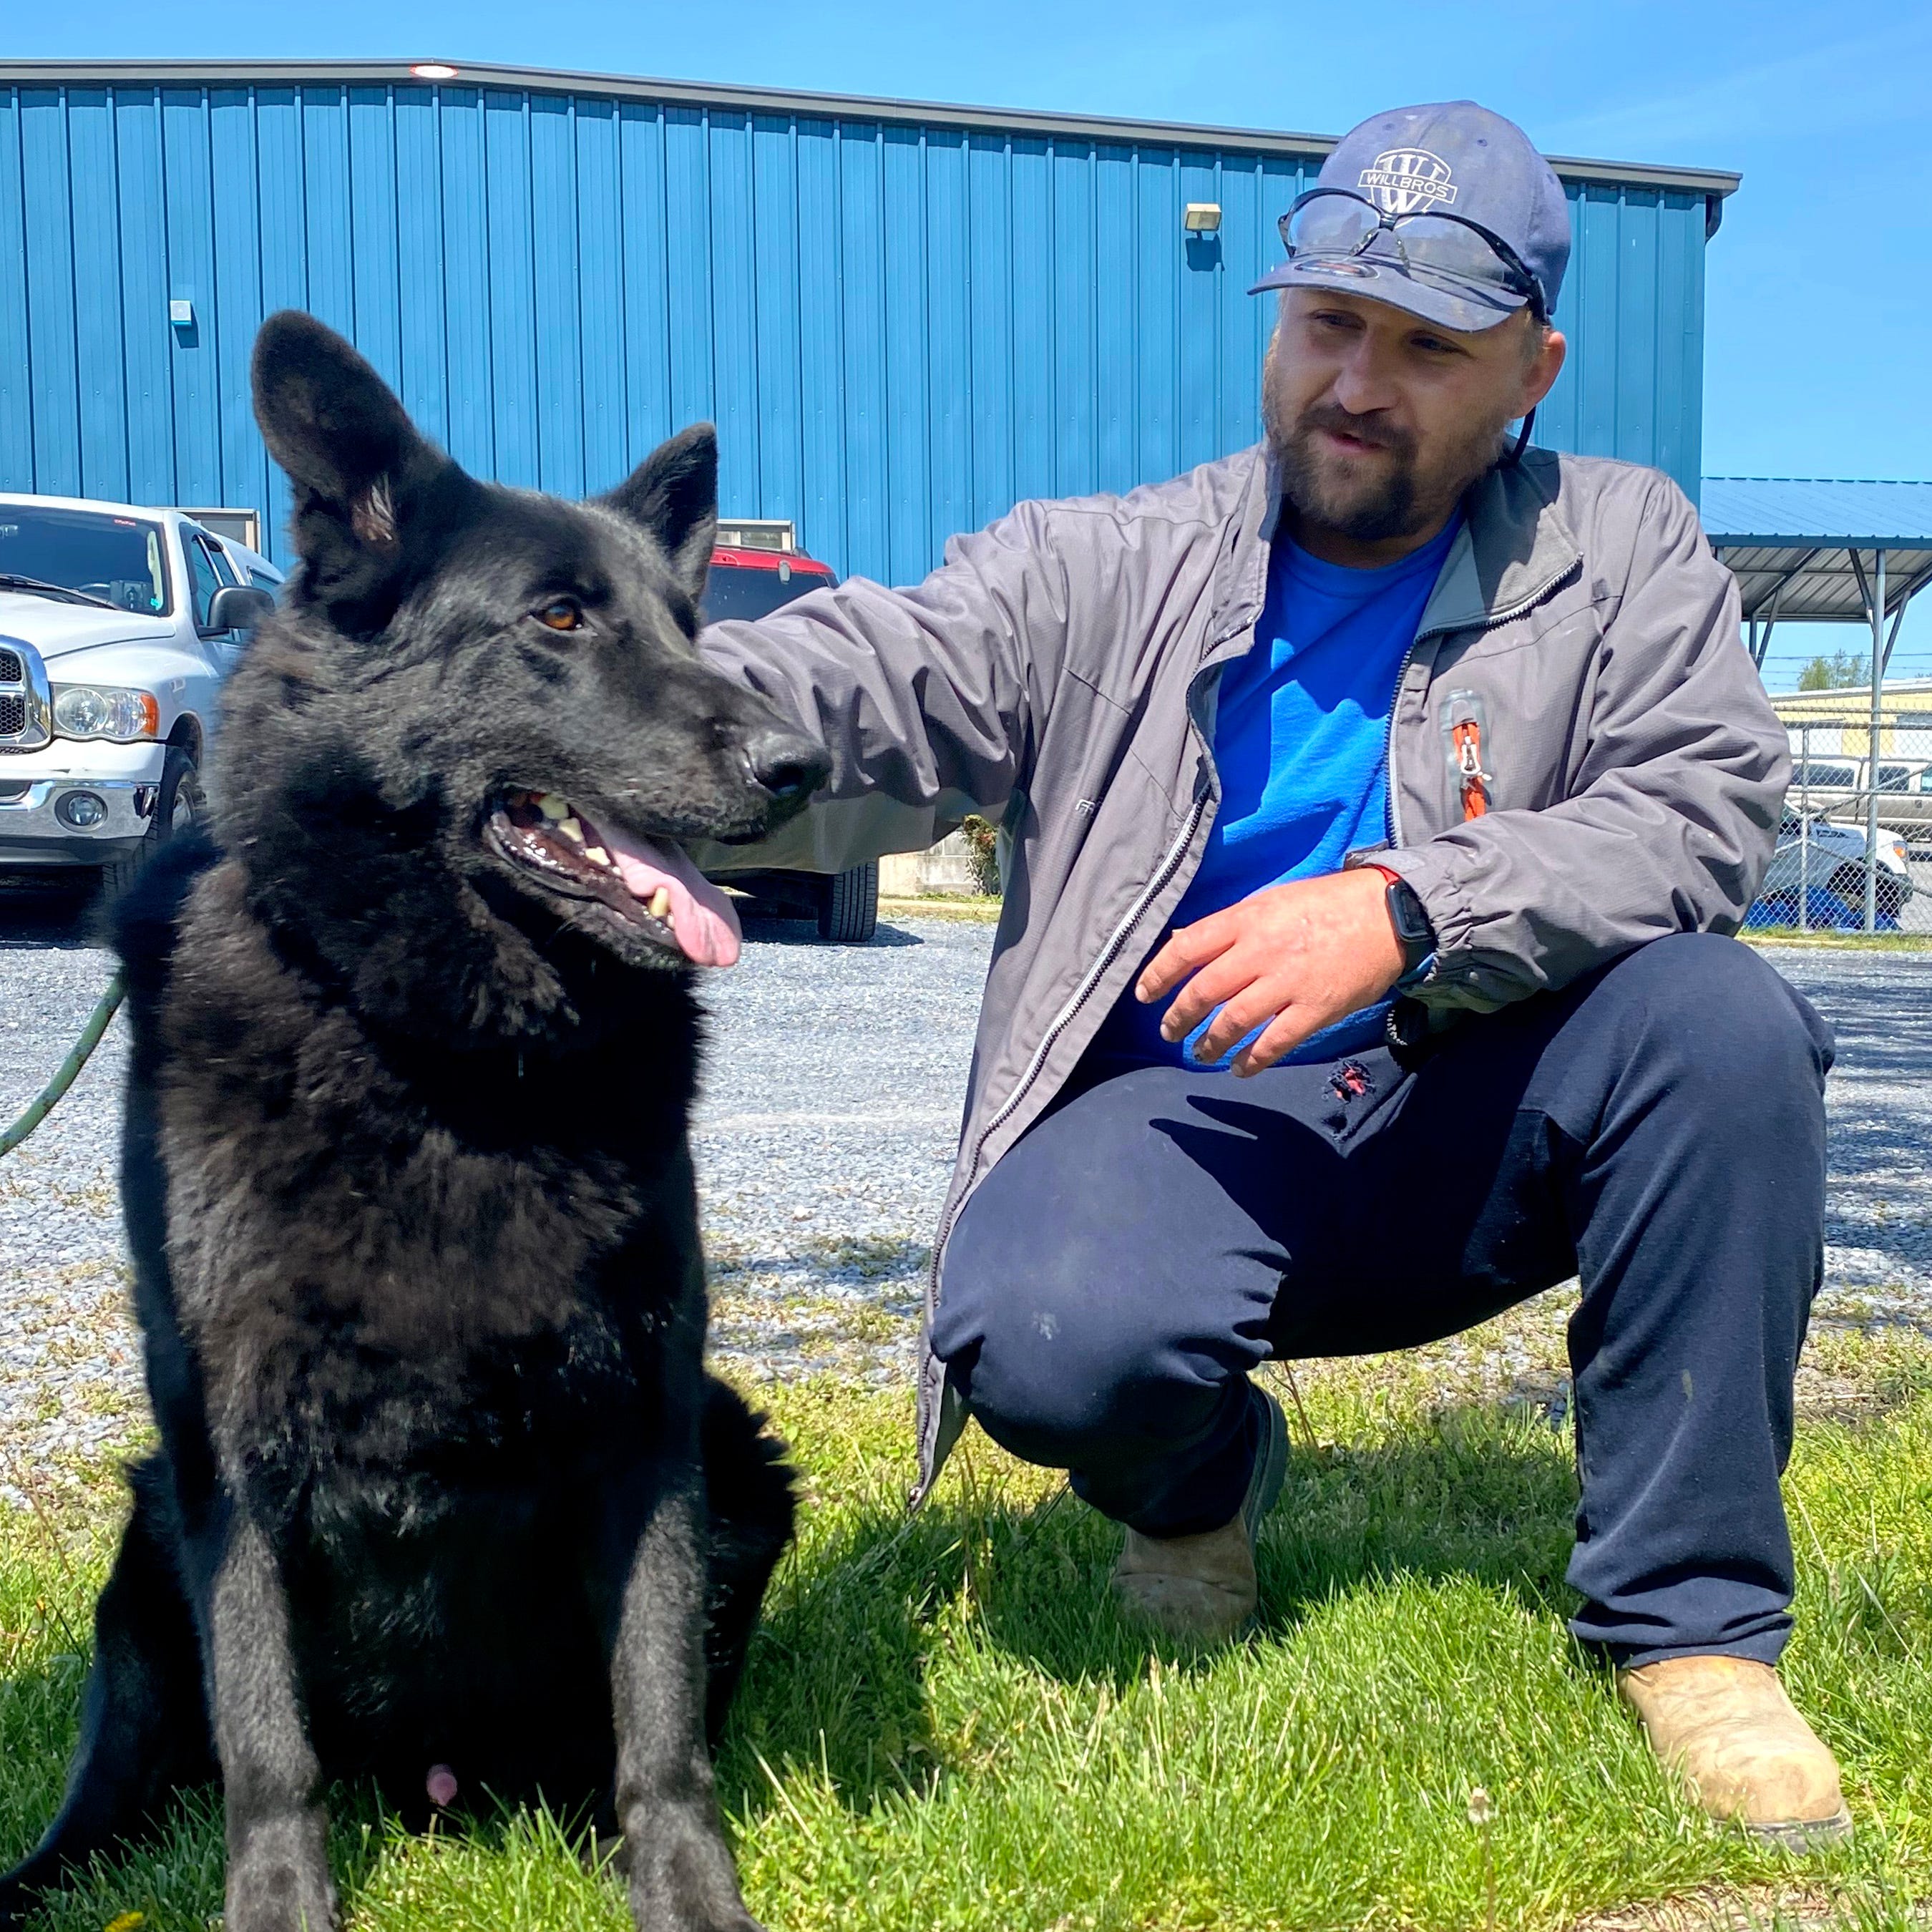 Cavaja Holt helped save Jett's life Wednesday. The German Shepard was choking on a ball until Holt pulled it out and gave the dog mouth-to-mouth resuscitation.